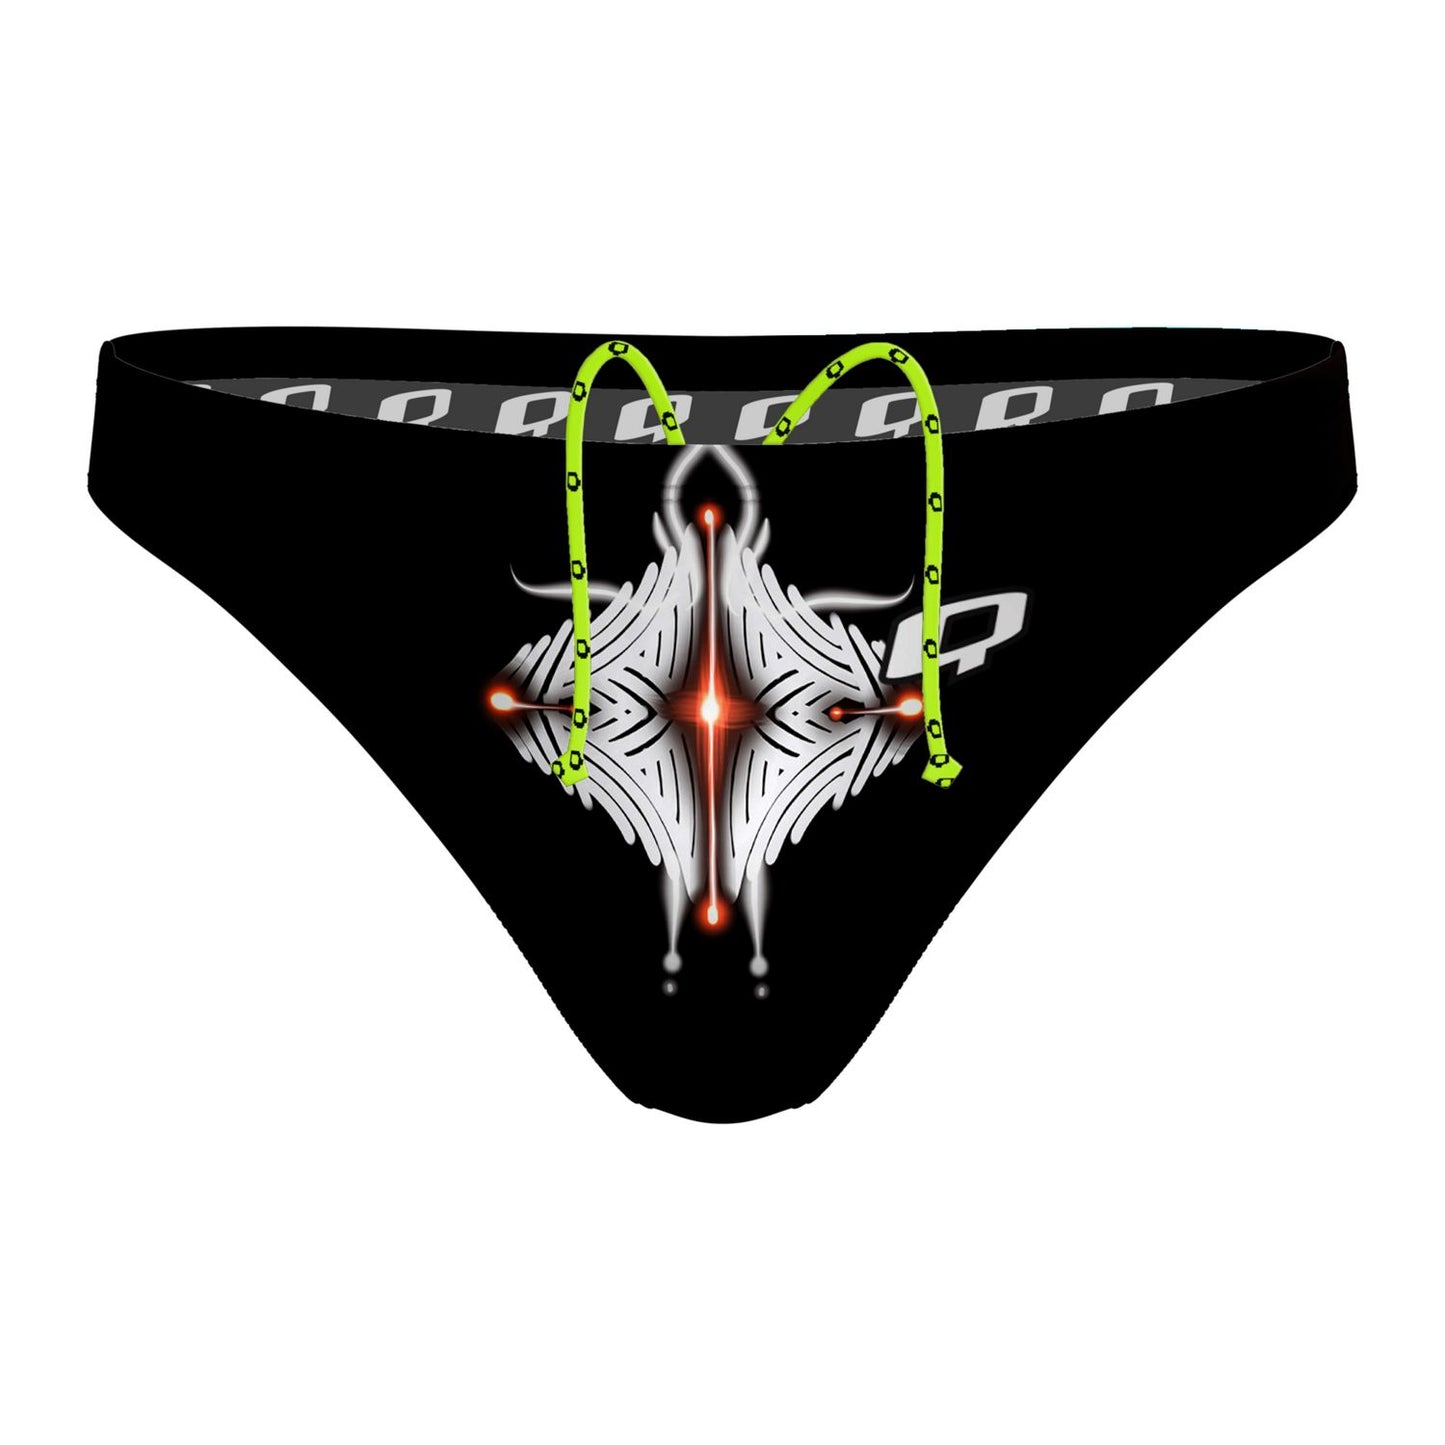 Protection Waterpolo Brief